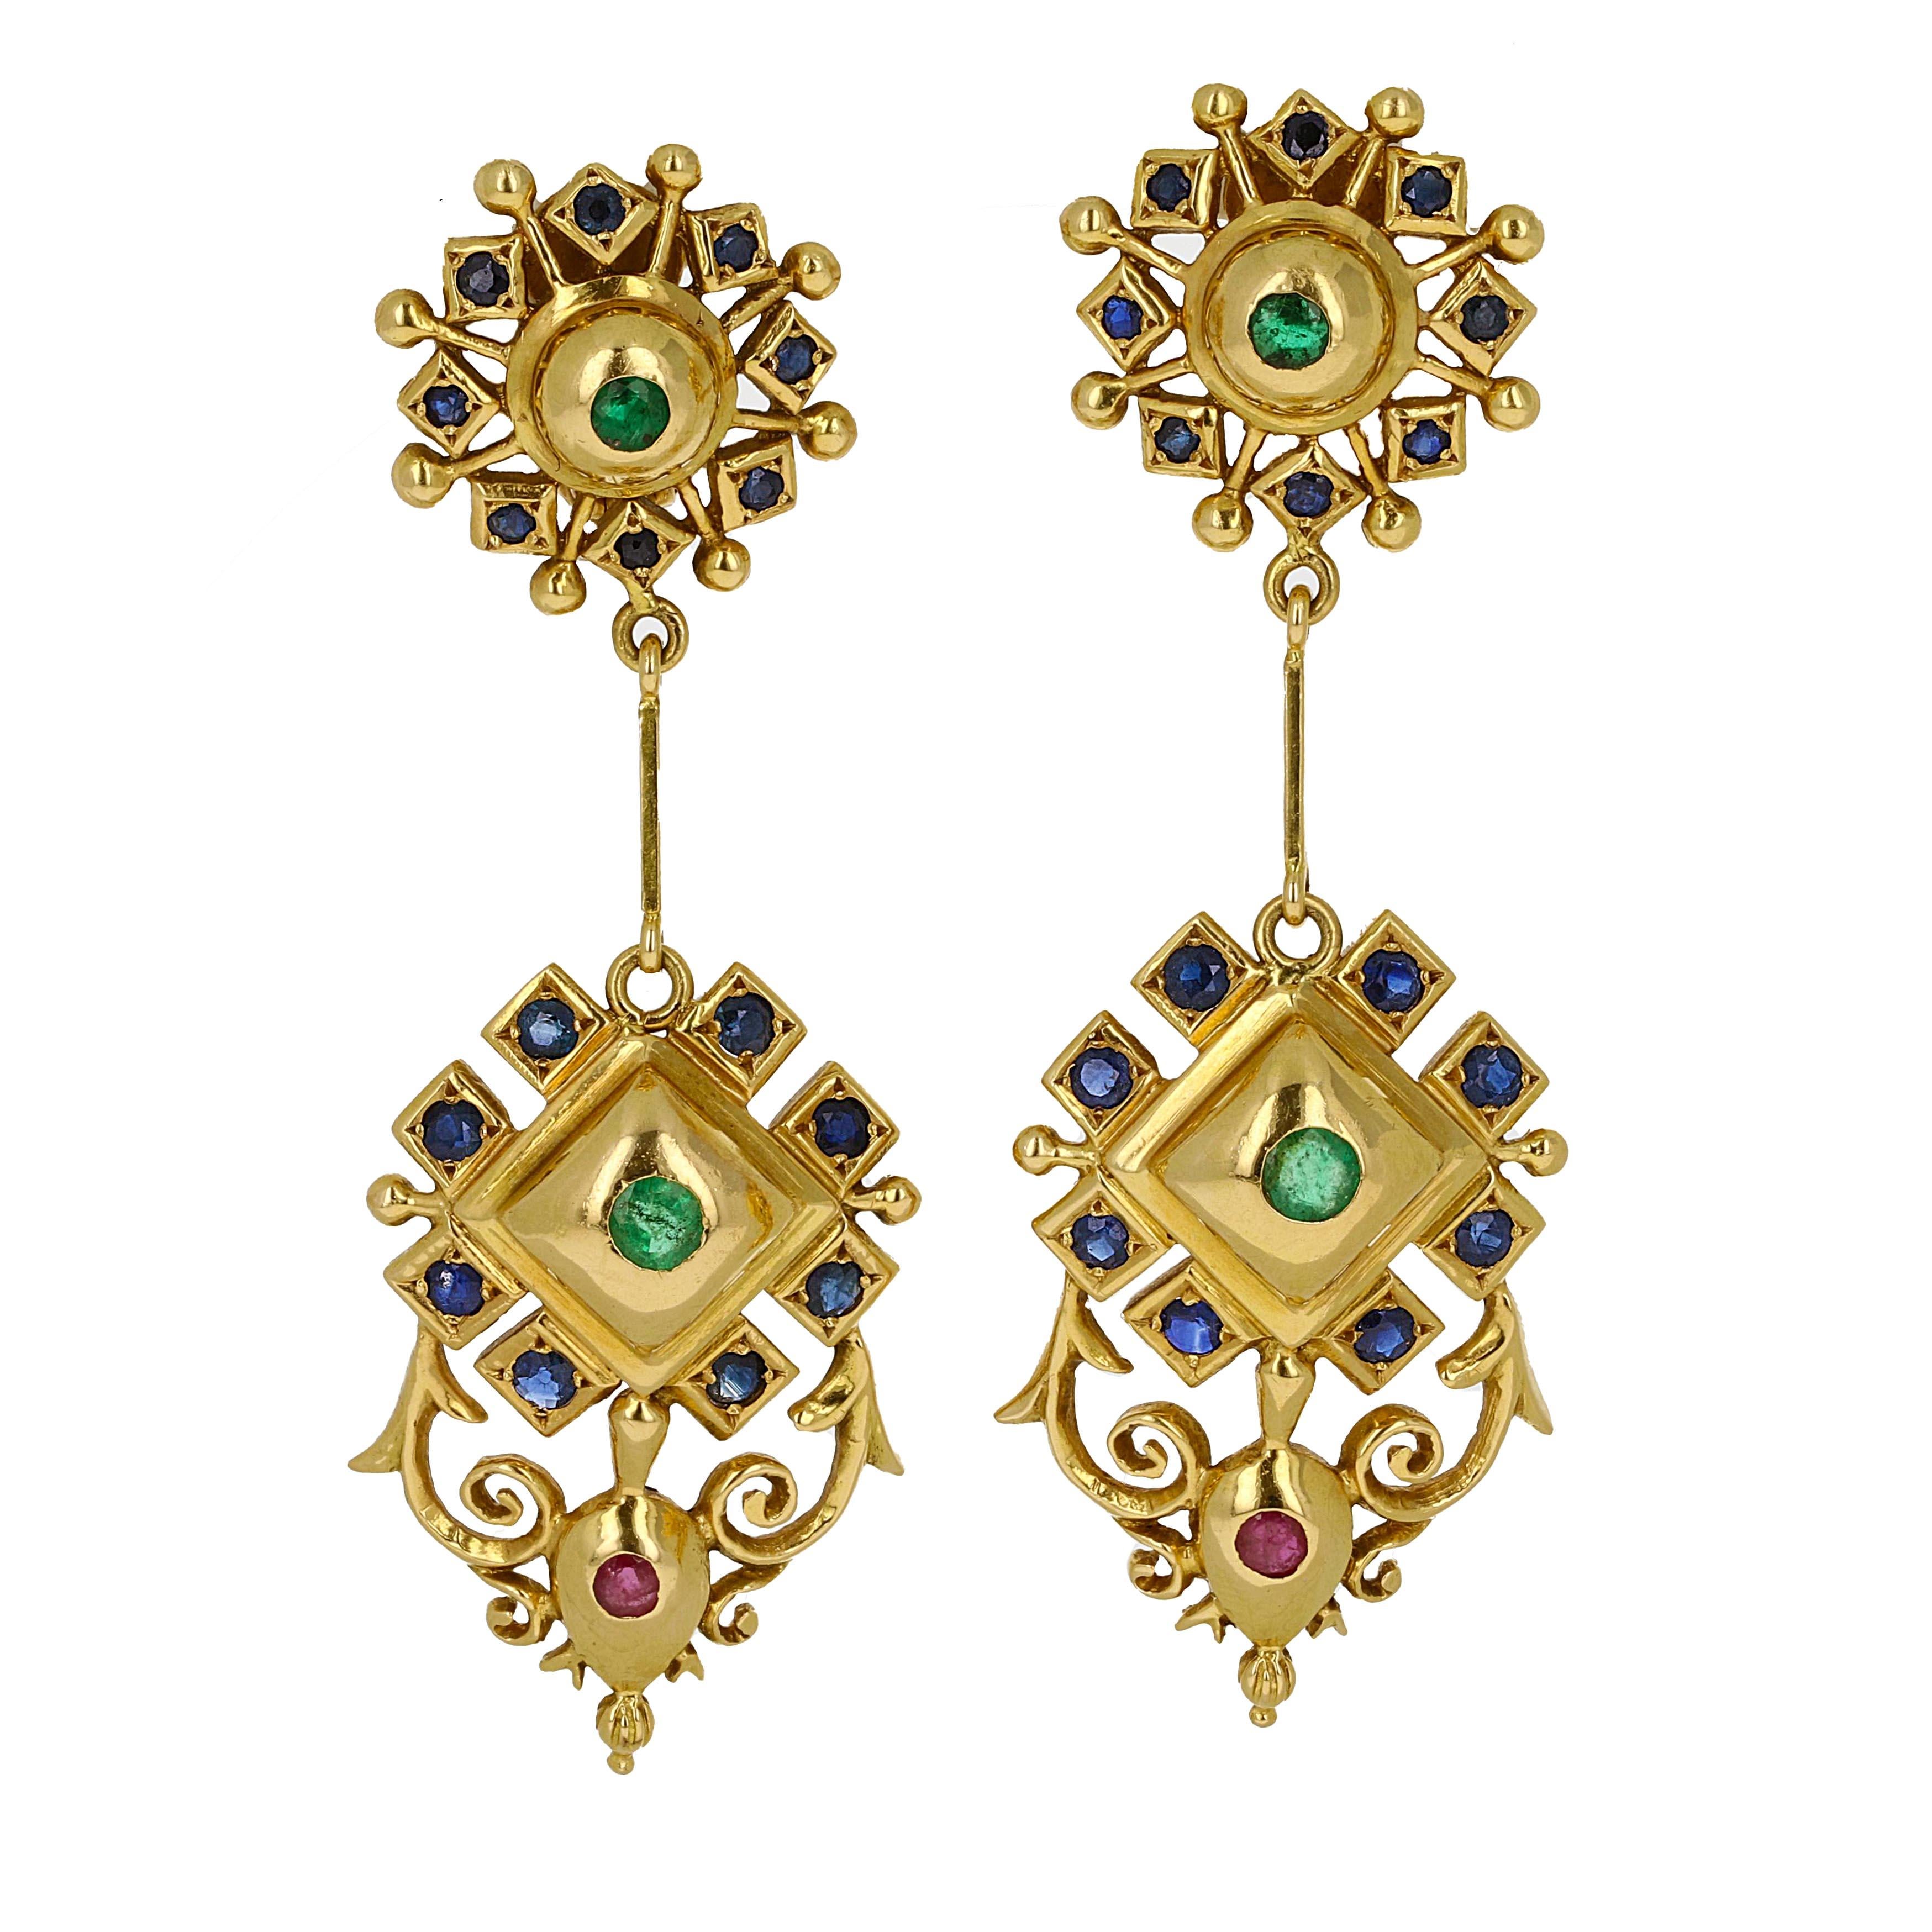 Ilias Lalaounis 18kt yellow gold 1970's retro drop chandelier gemstone earrings. These yellow gold earrings have a total of 2 rubies, 4 emeralds and 32 cabochon cut sapphires. Each stone is bezel set and embraced with intricate hand filigree.

They